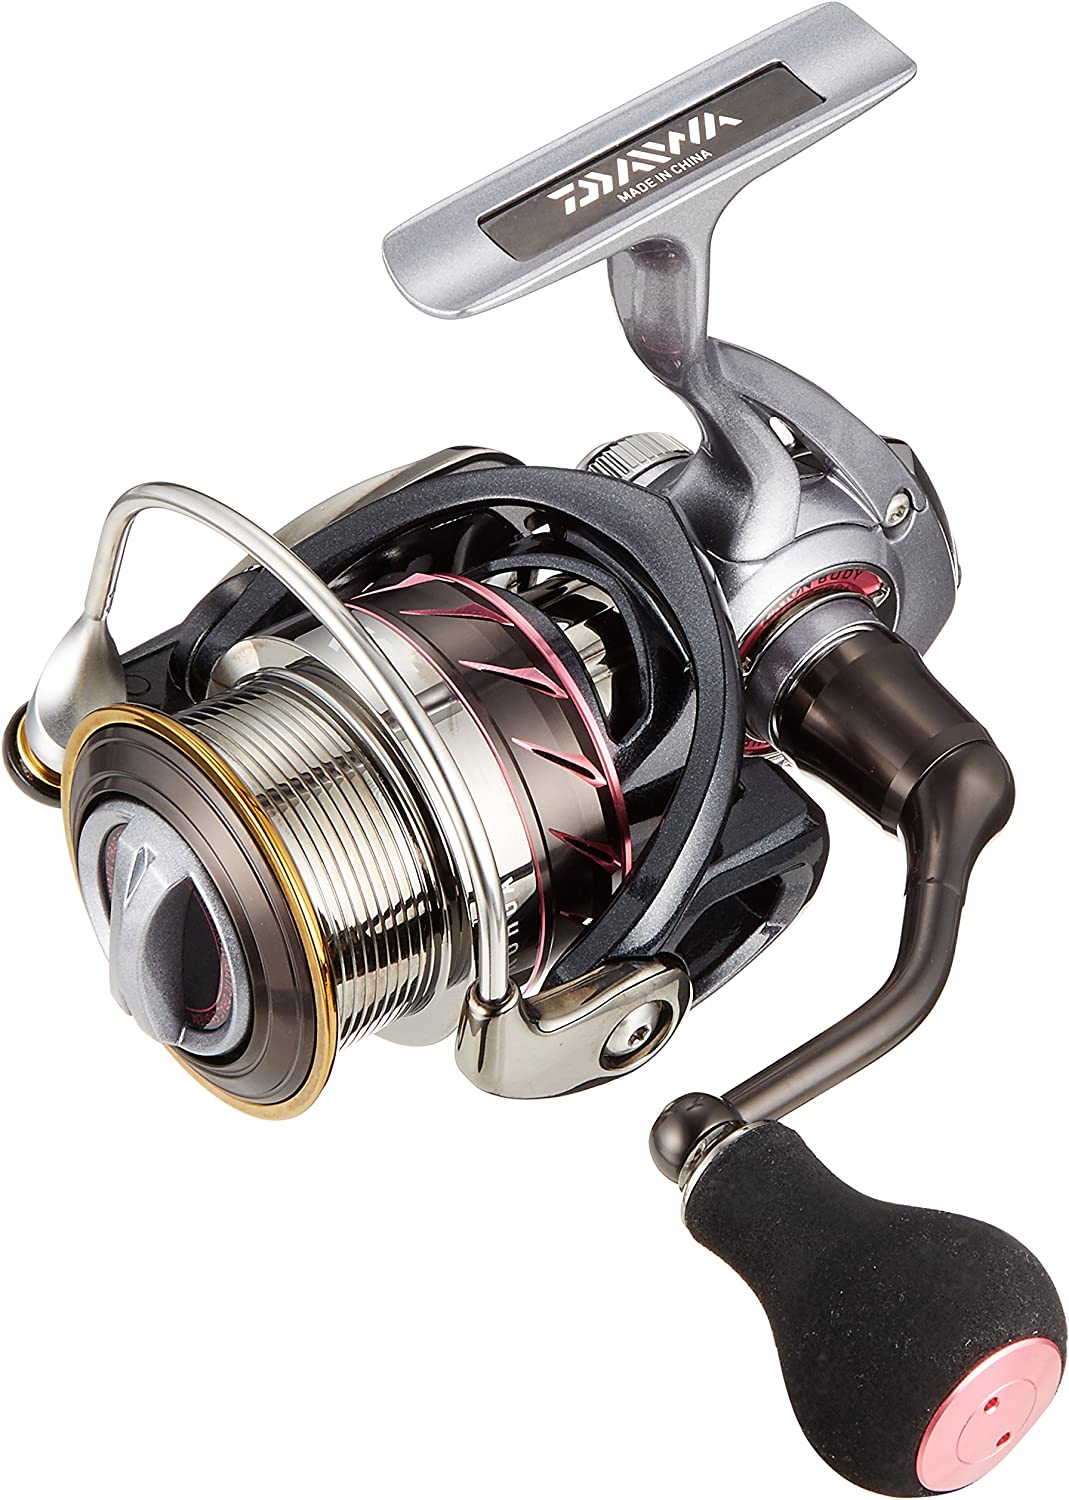 Daiwa Tyraba Spinning Reel 15 Red Fang MX 2508PE-H (2500 size) - Discovery  Japan Mall